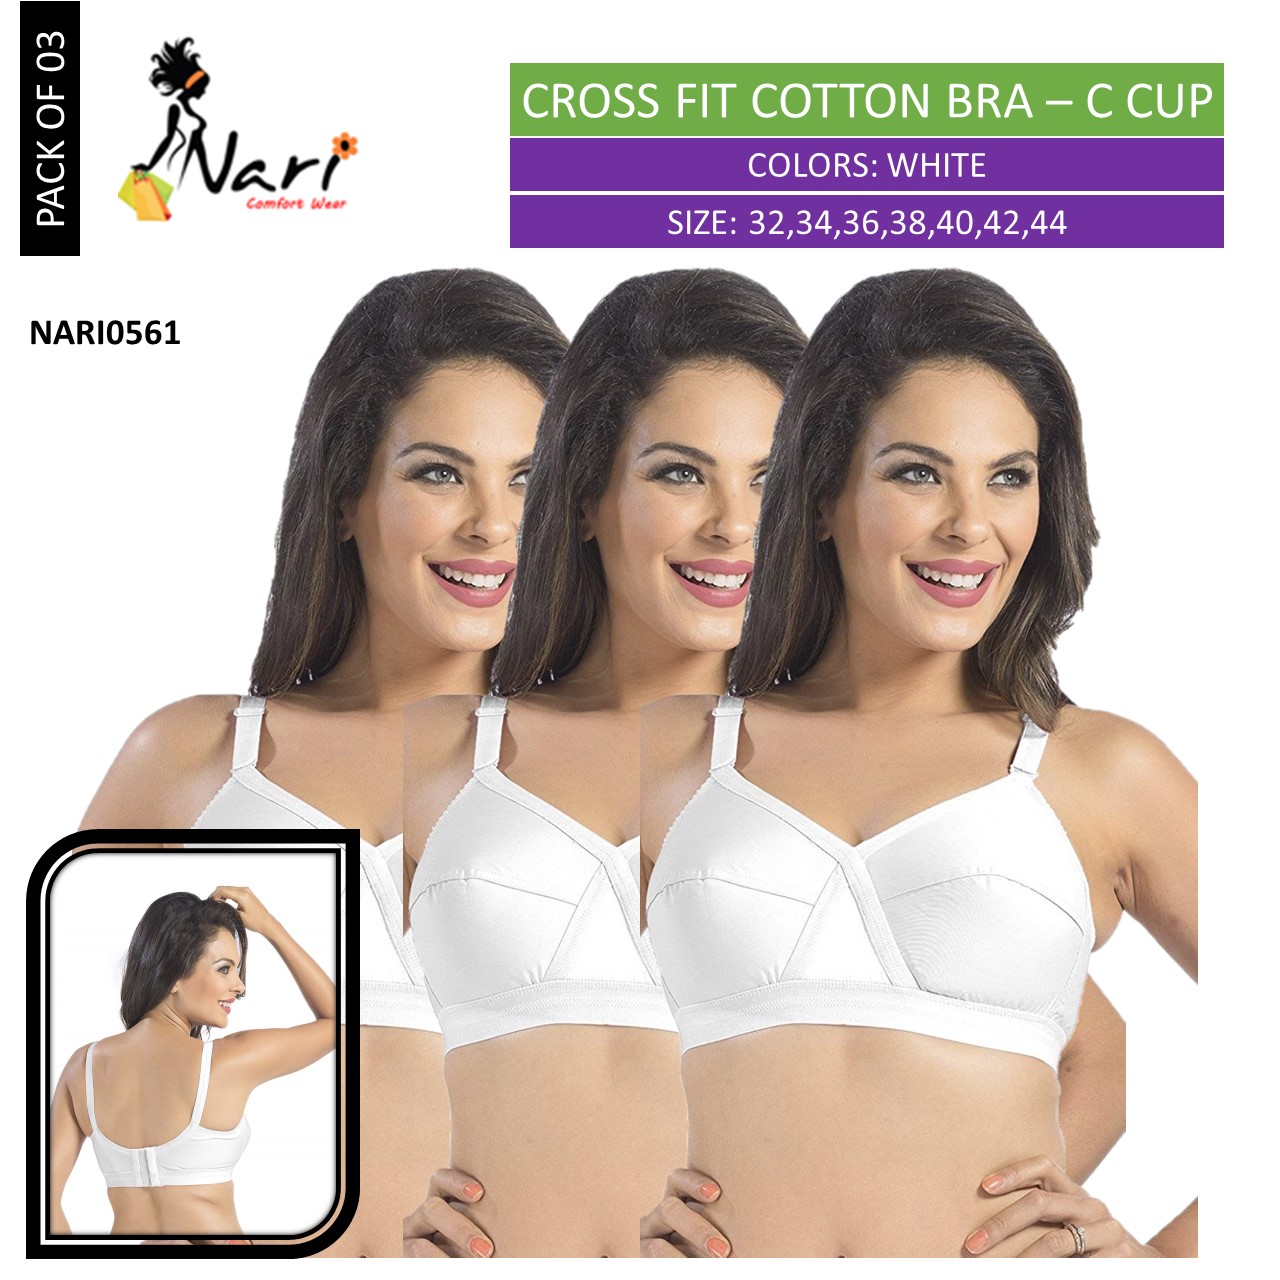 https://onlineshoppingpoint.in/wp-content/uploads/2021/12/0561-Cross-Fit-Cotton-Bra-C-Cup-Pack-of-03.jpg